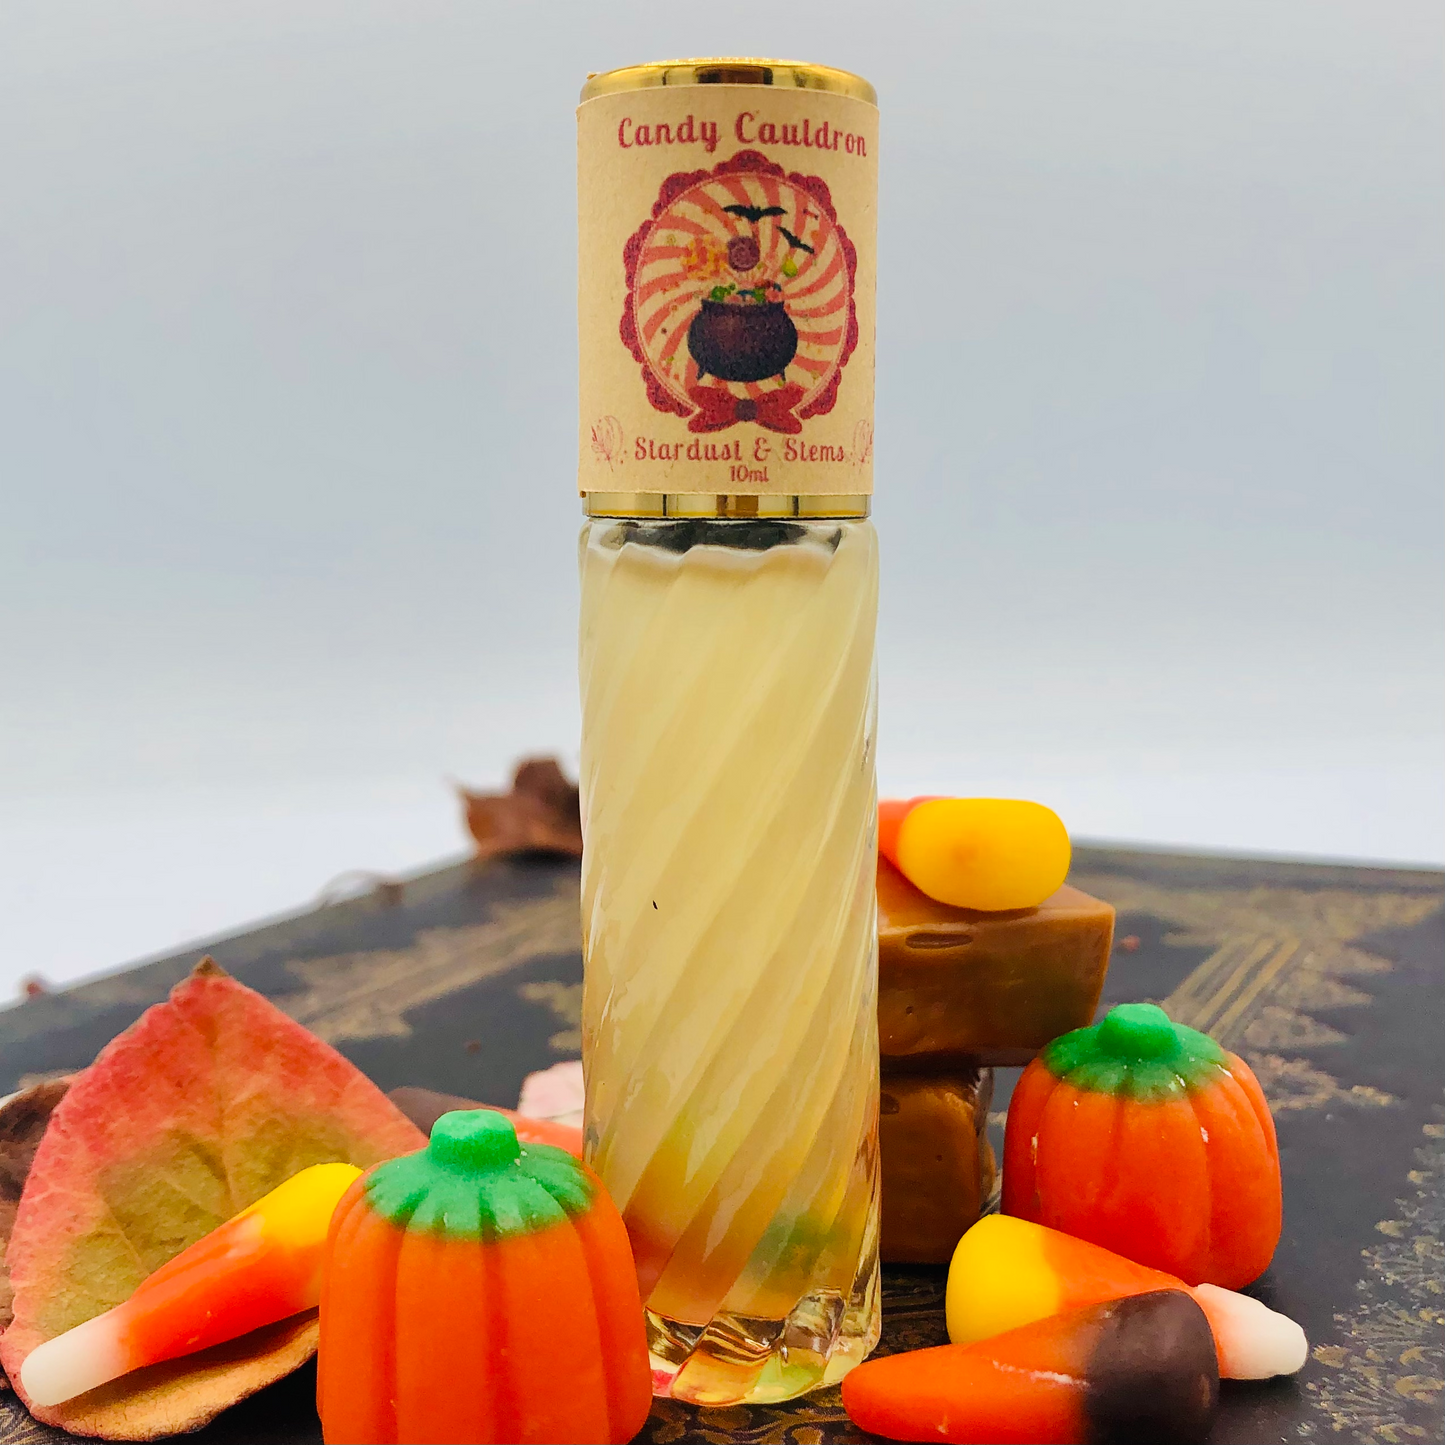 CANDY CAULDRON Enchanting Halloween Autumn Perfume Marshmallow, Cocoa, and Fairy Scents | Indie, Natural Fragrance Oils for a Magical Season